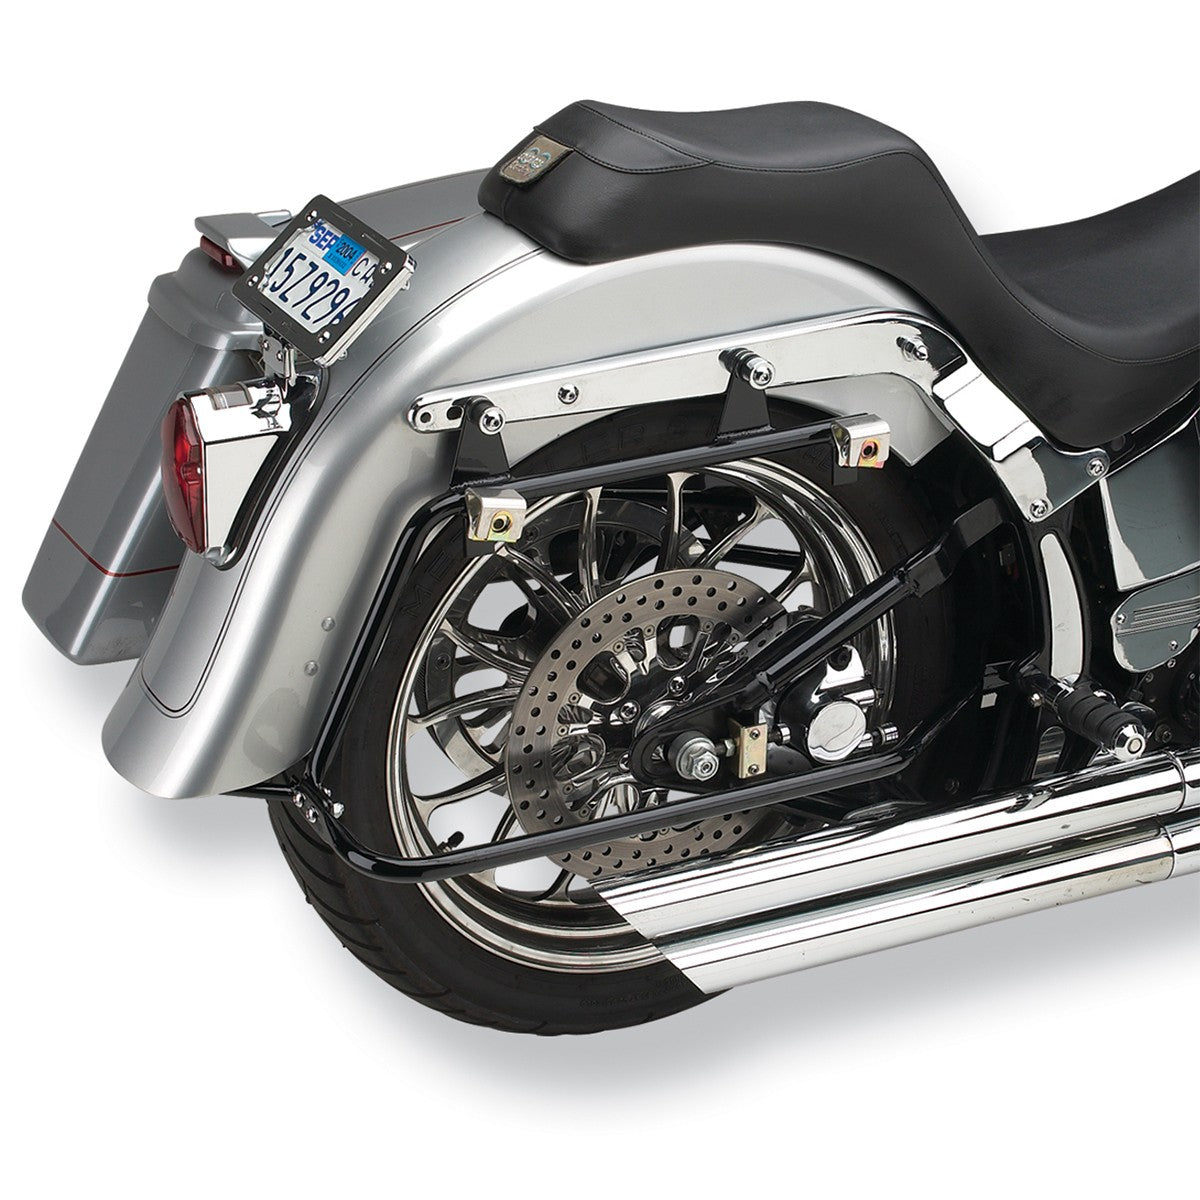 Bagger-Tail for Harley Davidson Softails